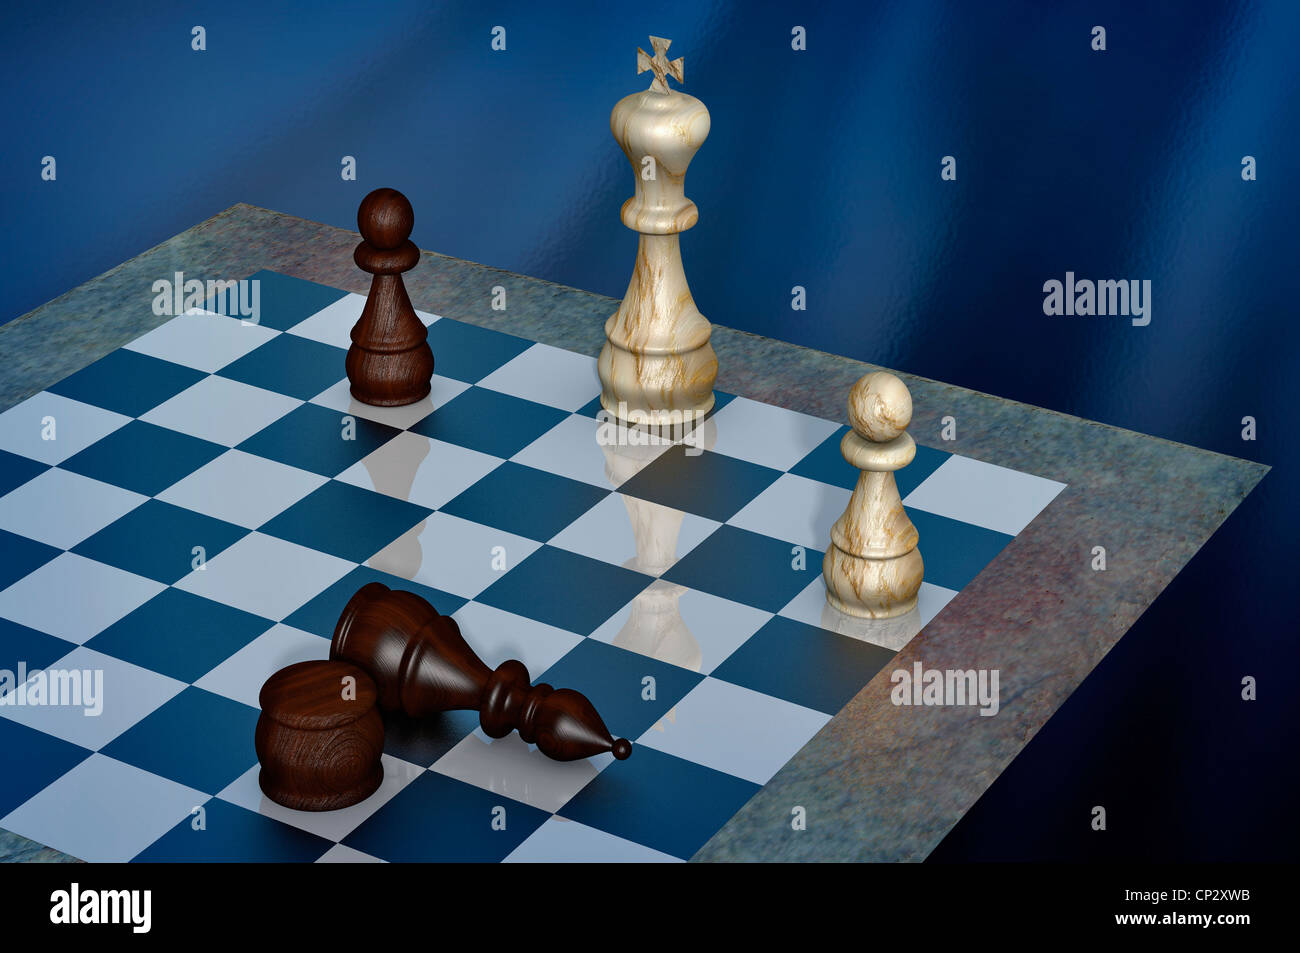 Man playing chess online on tablet computer Stock Photo